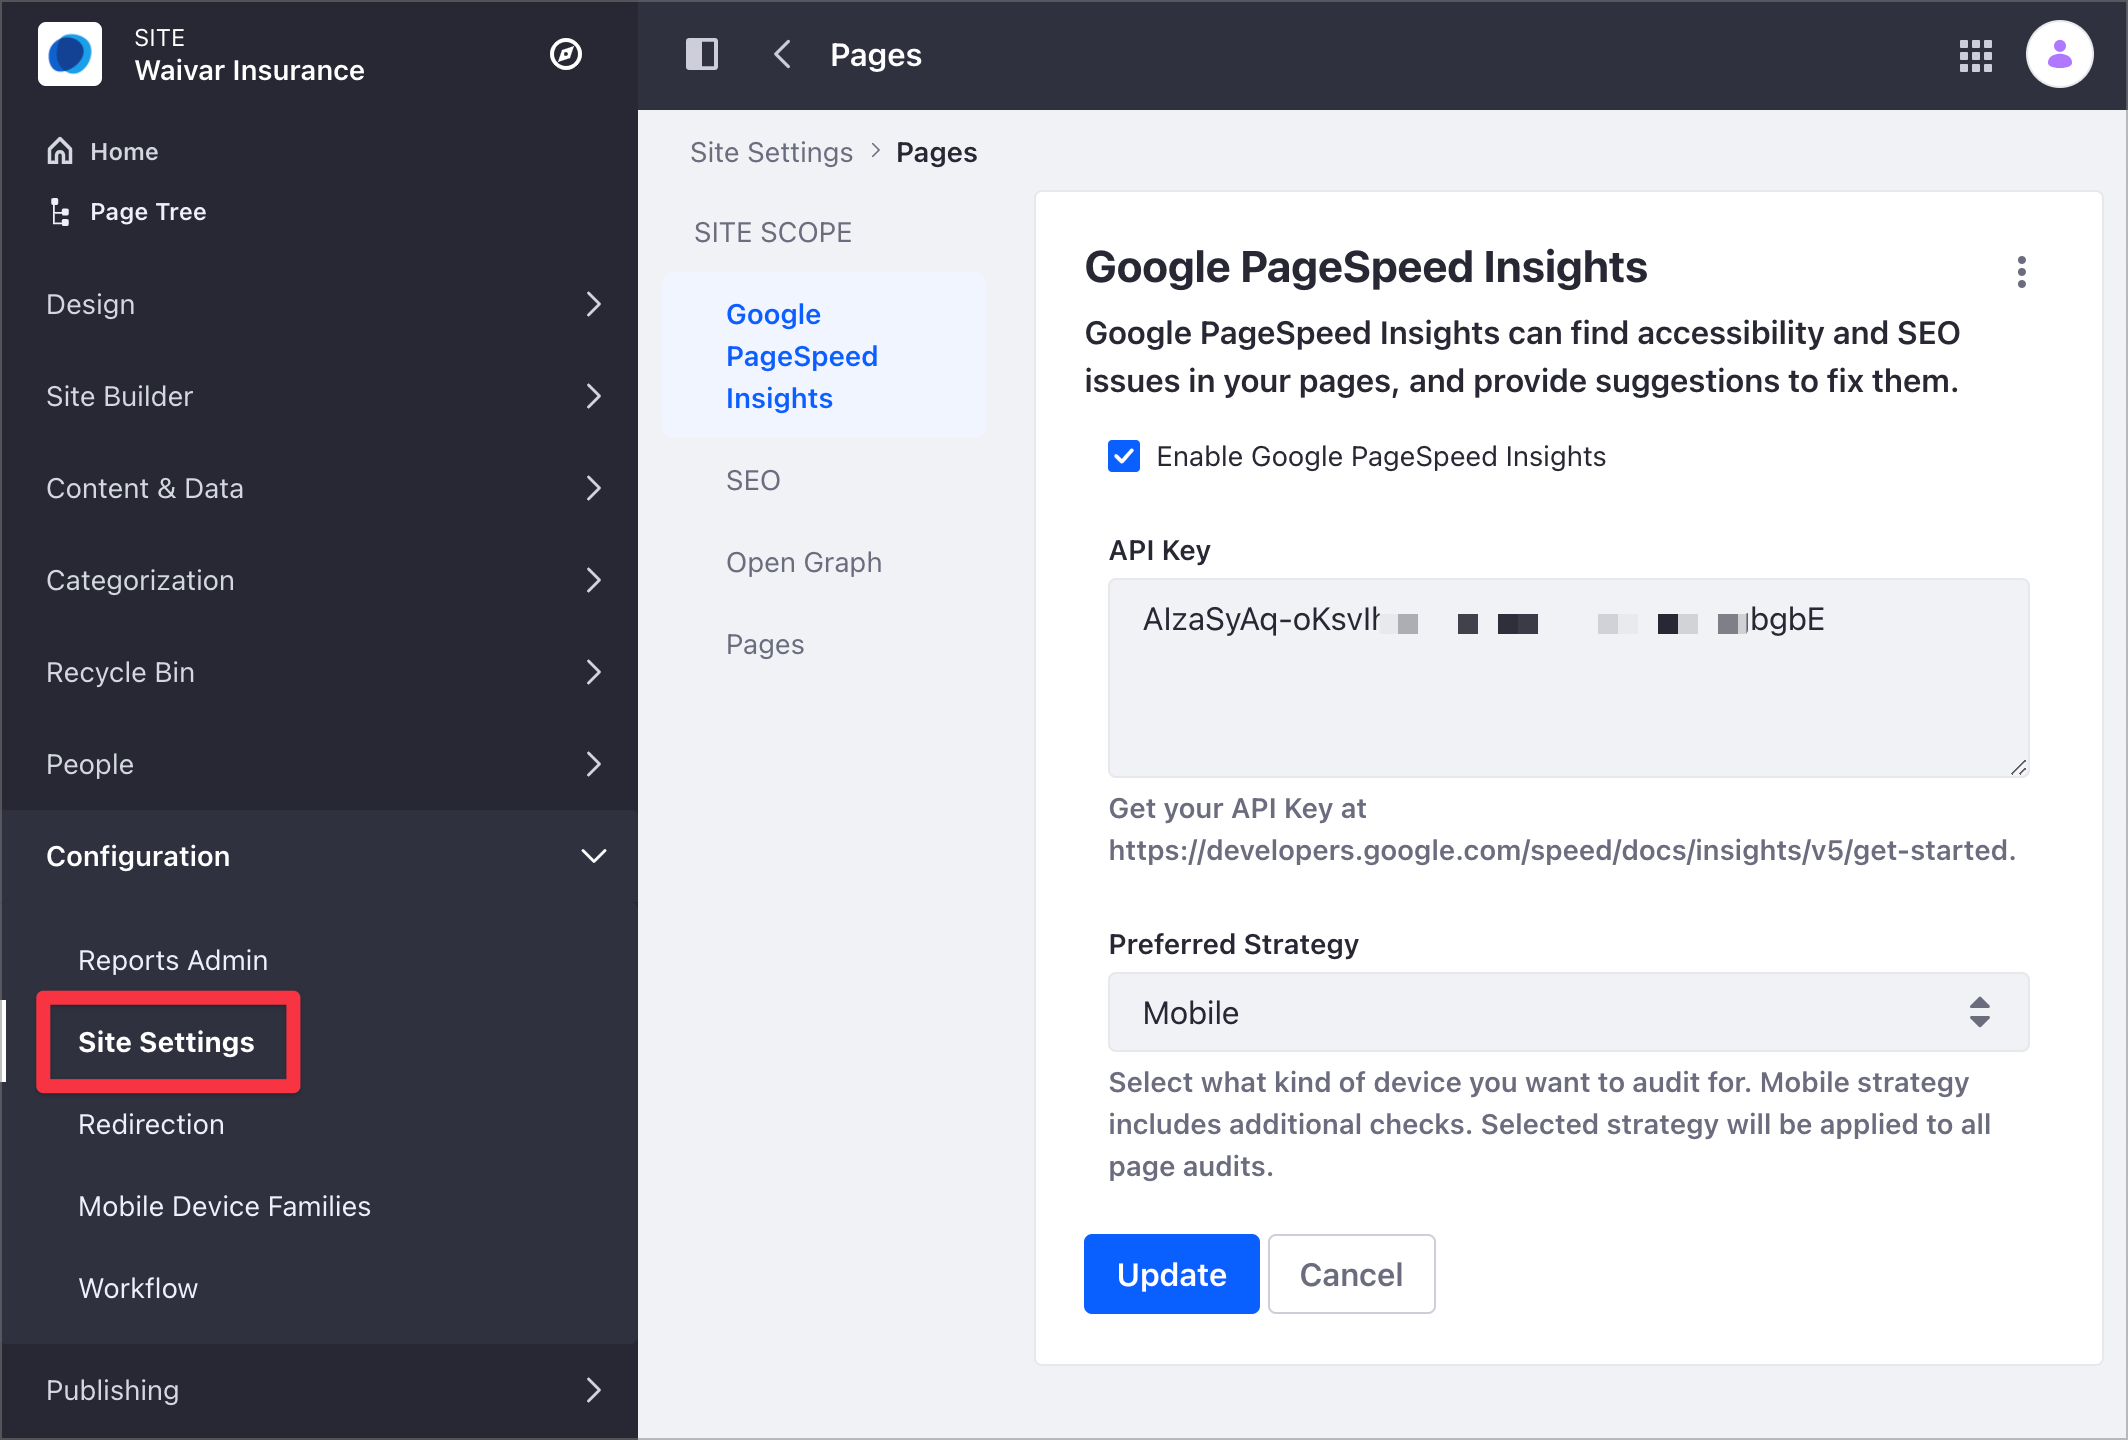 Use the Google PageSpeed Insights settings at the current Site scope to configure the Page Audit tool.